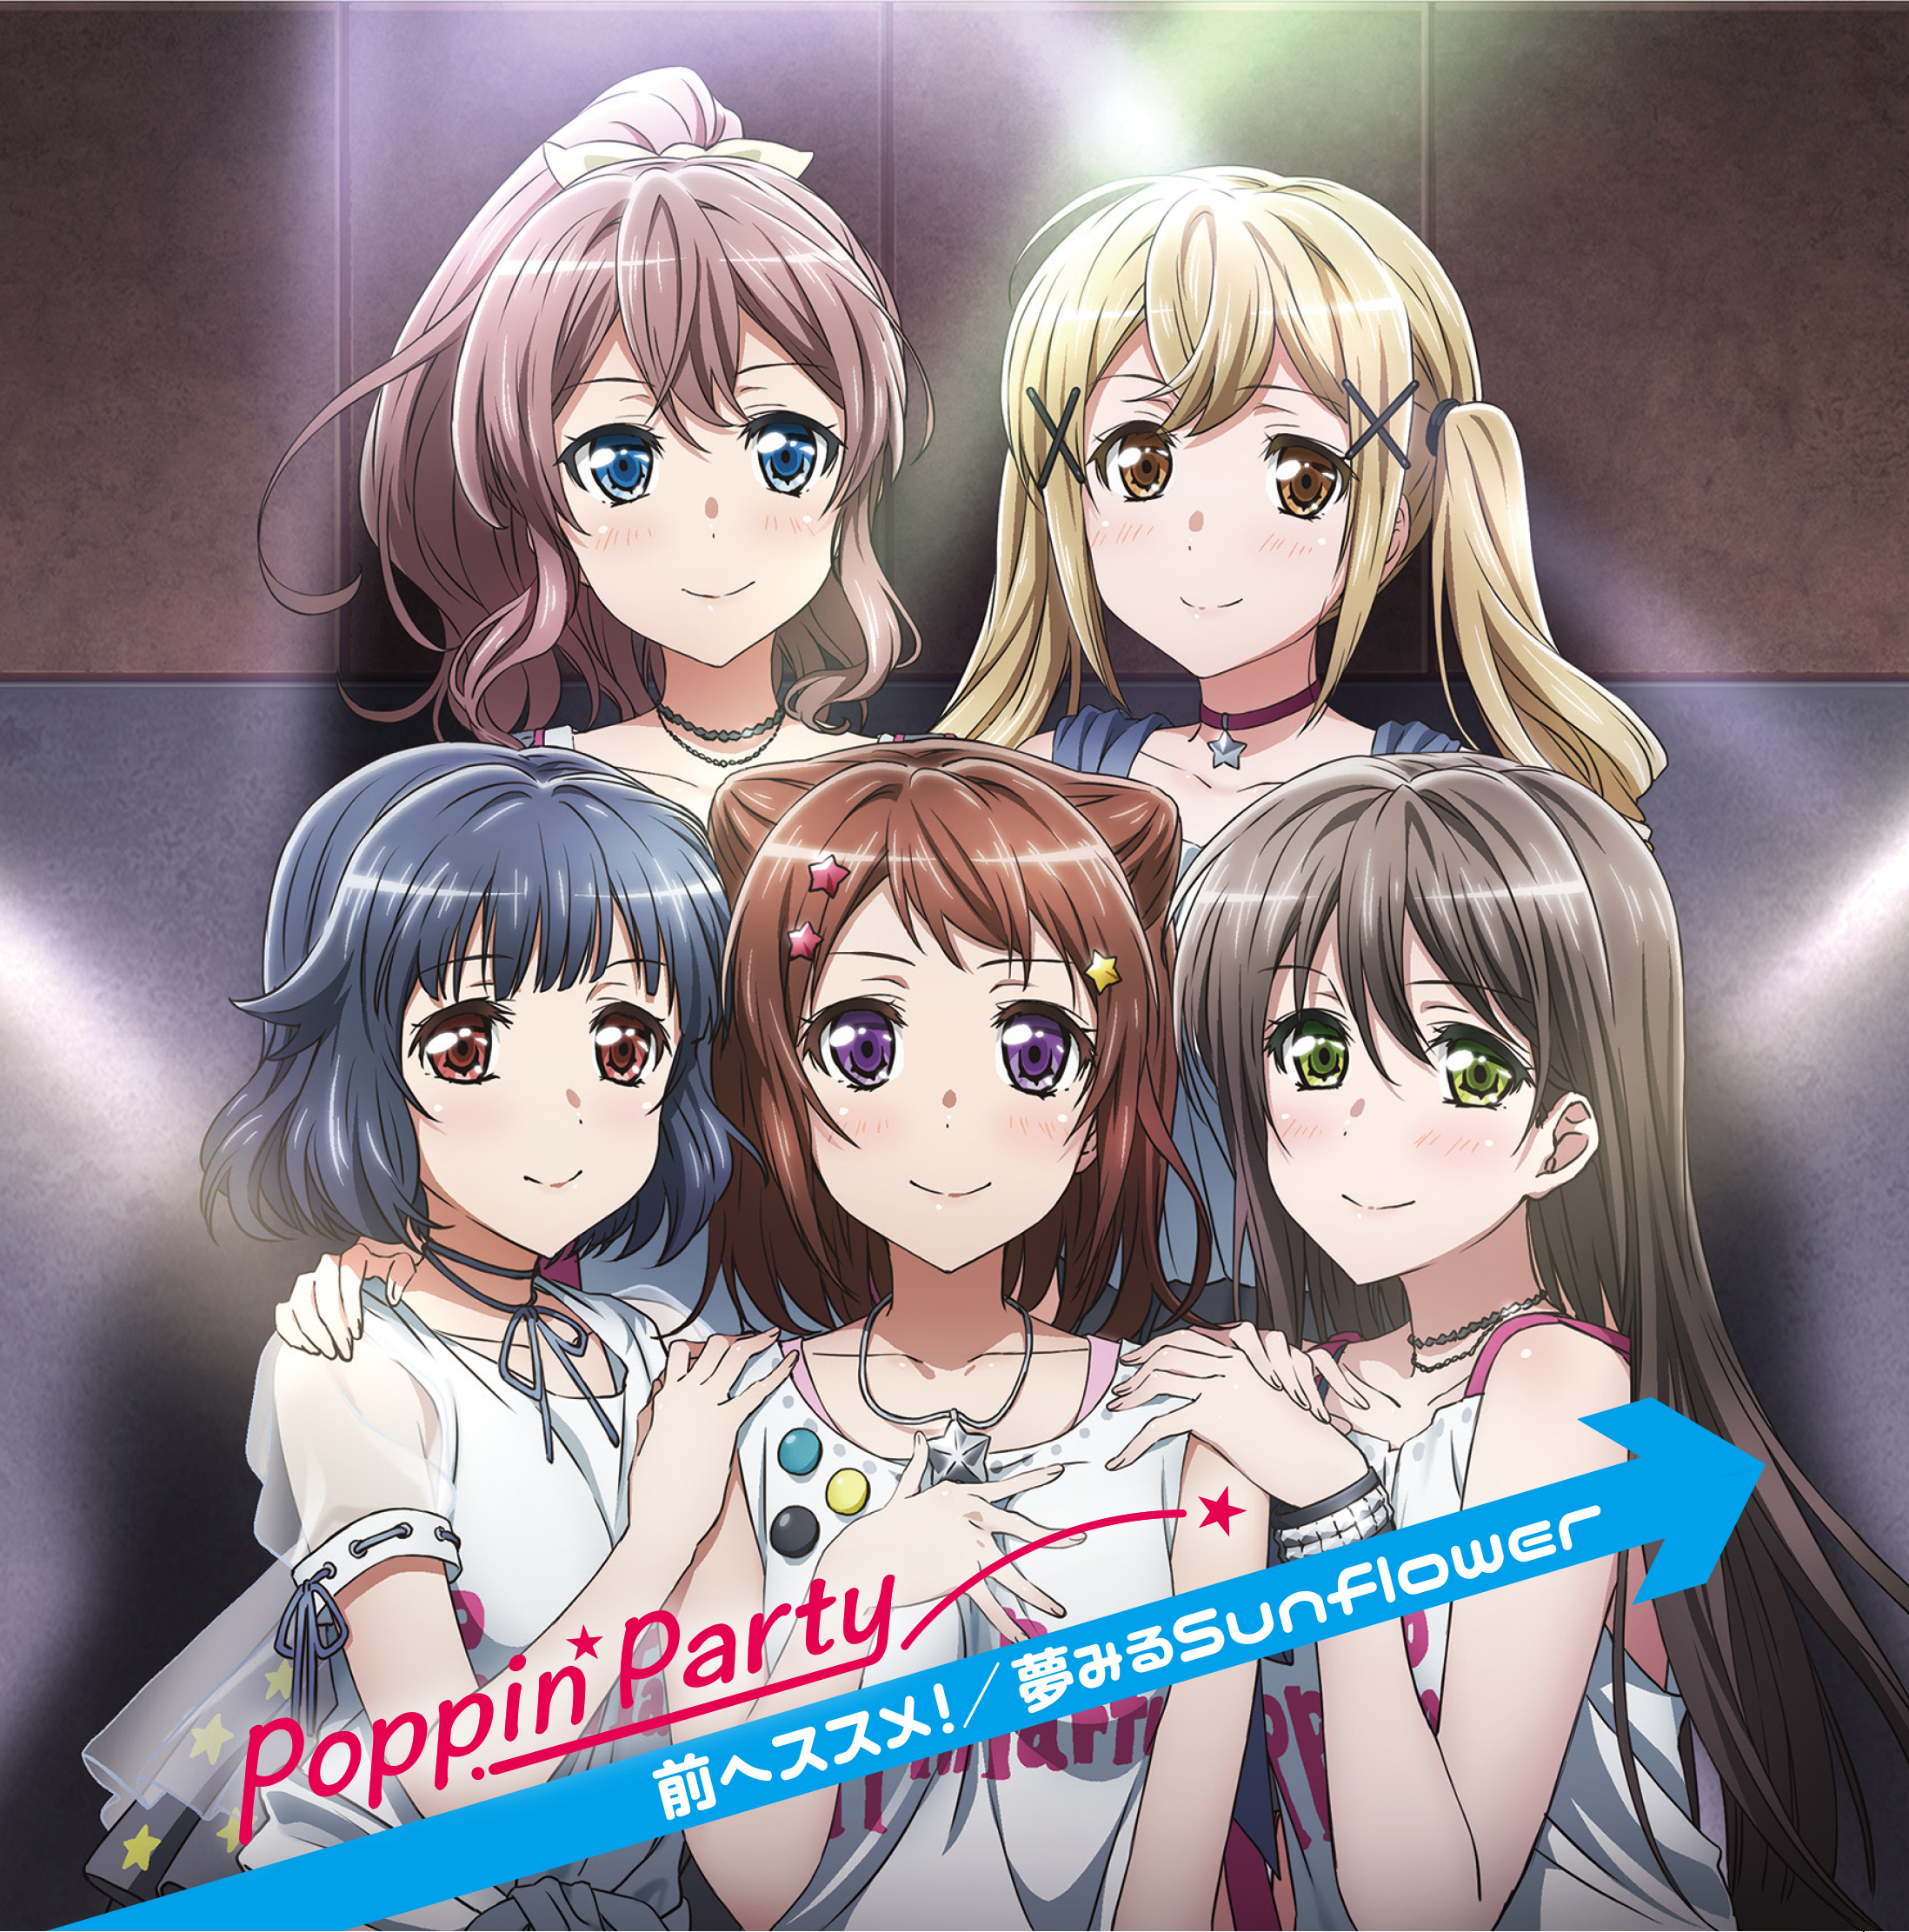 Mae e Susume! (Keep on Moving!) - Poppin'Party